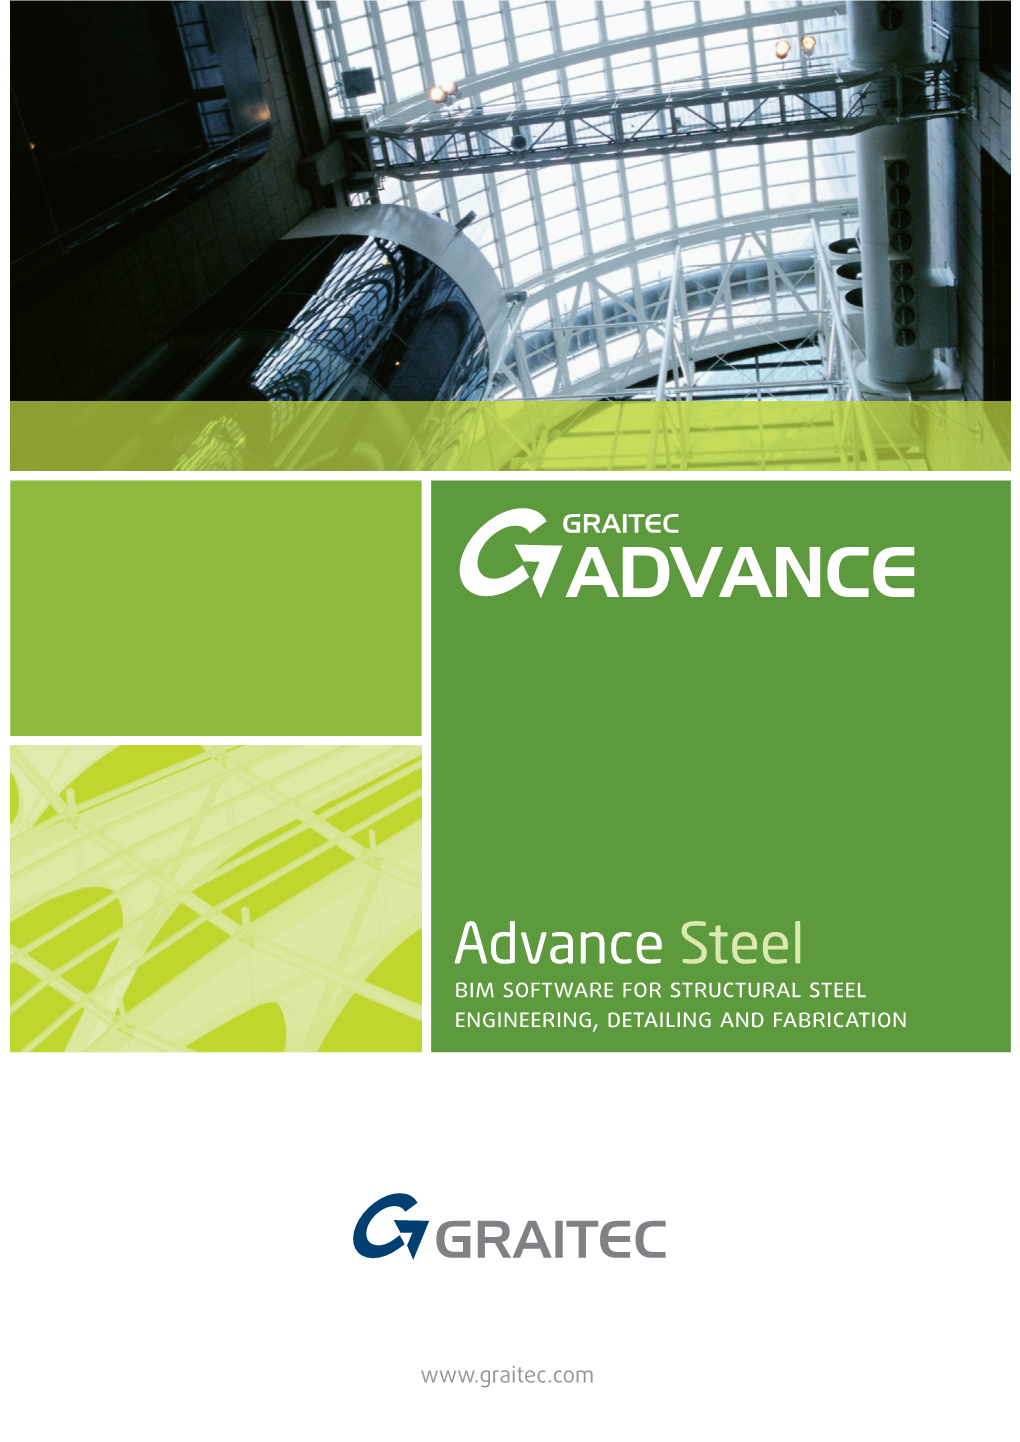 Advance Steel BIM SOFTWARE for STRUCTURAL STEEL ENGINEERING, DETAILING and FABRICATION